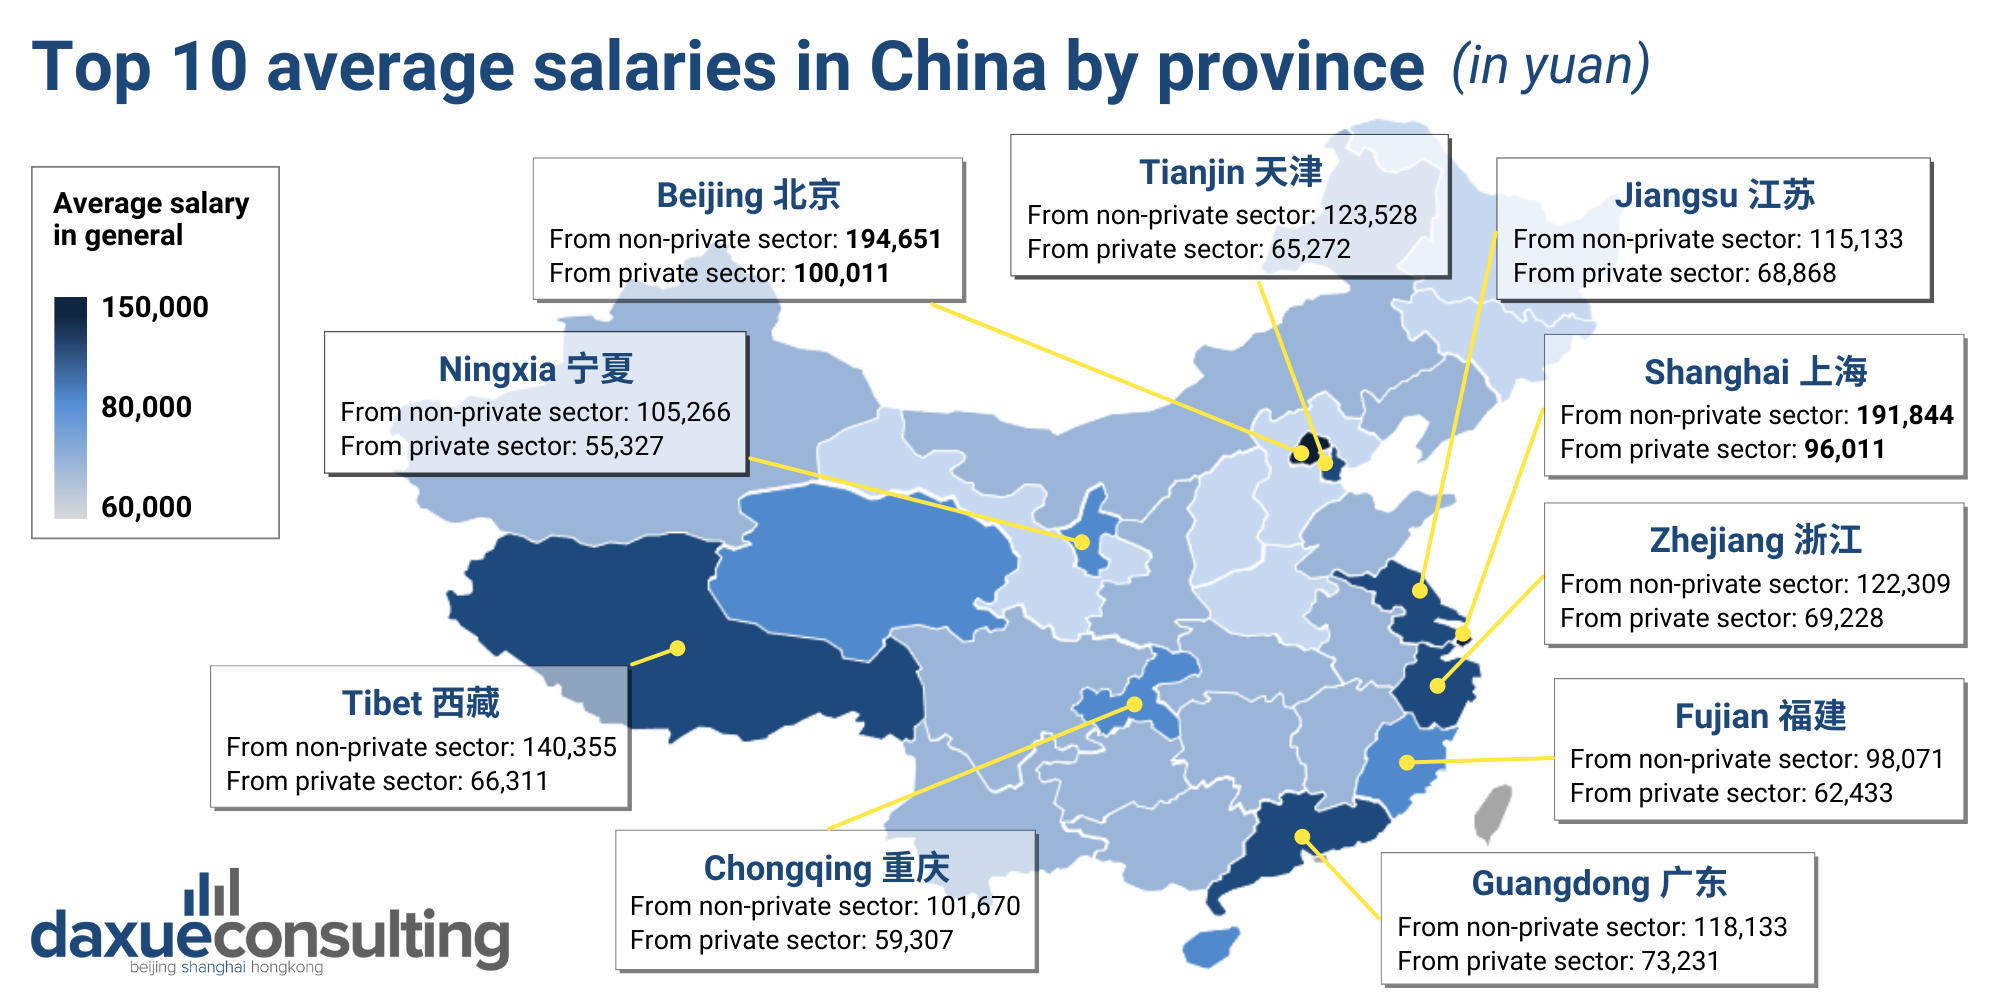 The top 10 average salary in China by provinces